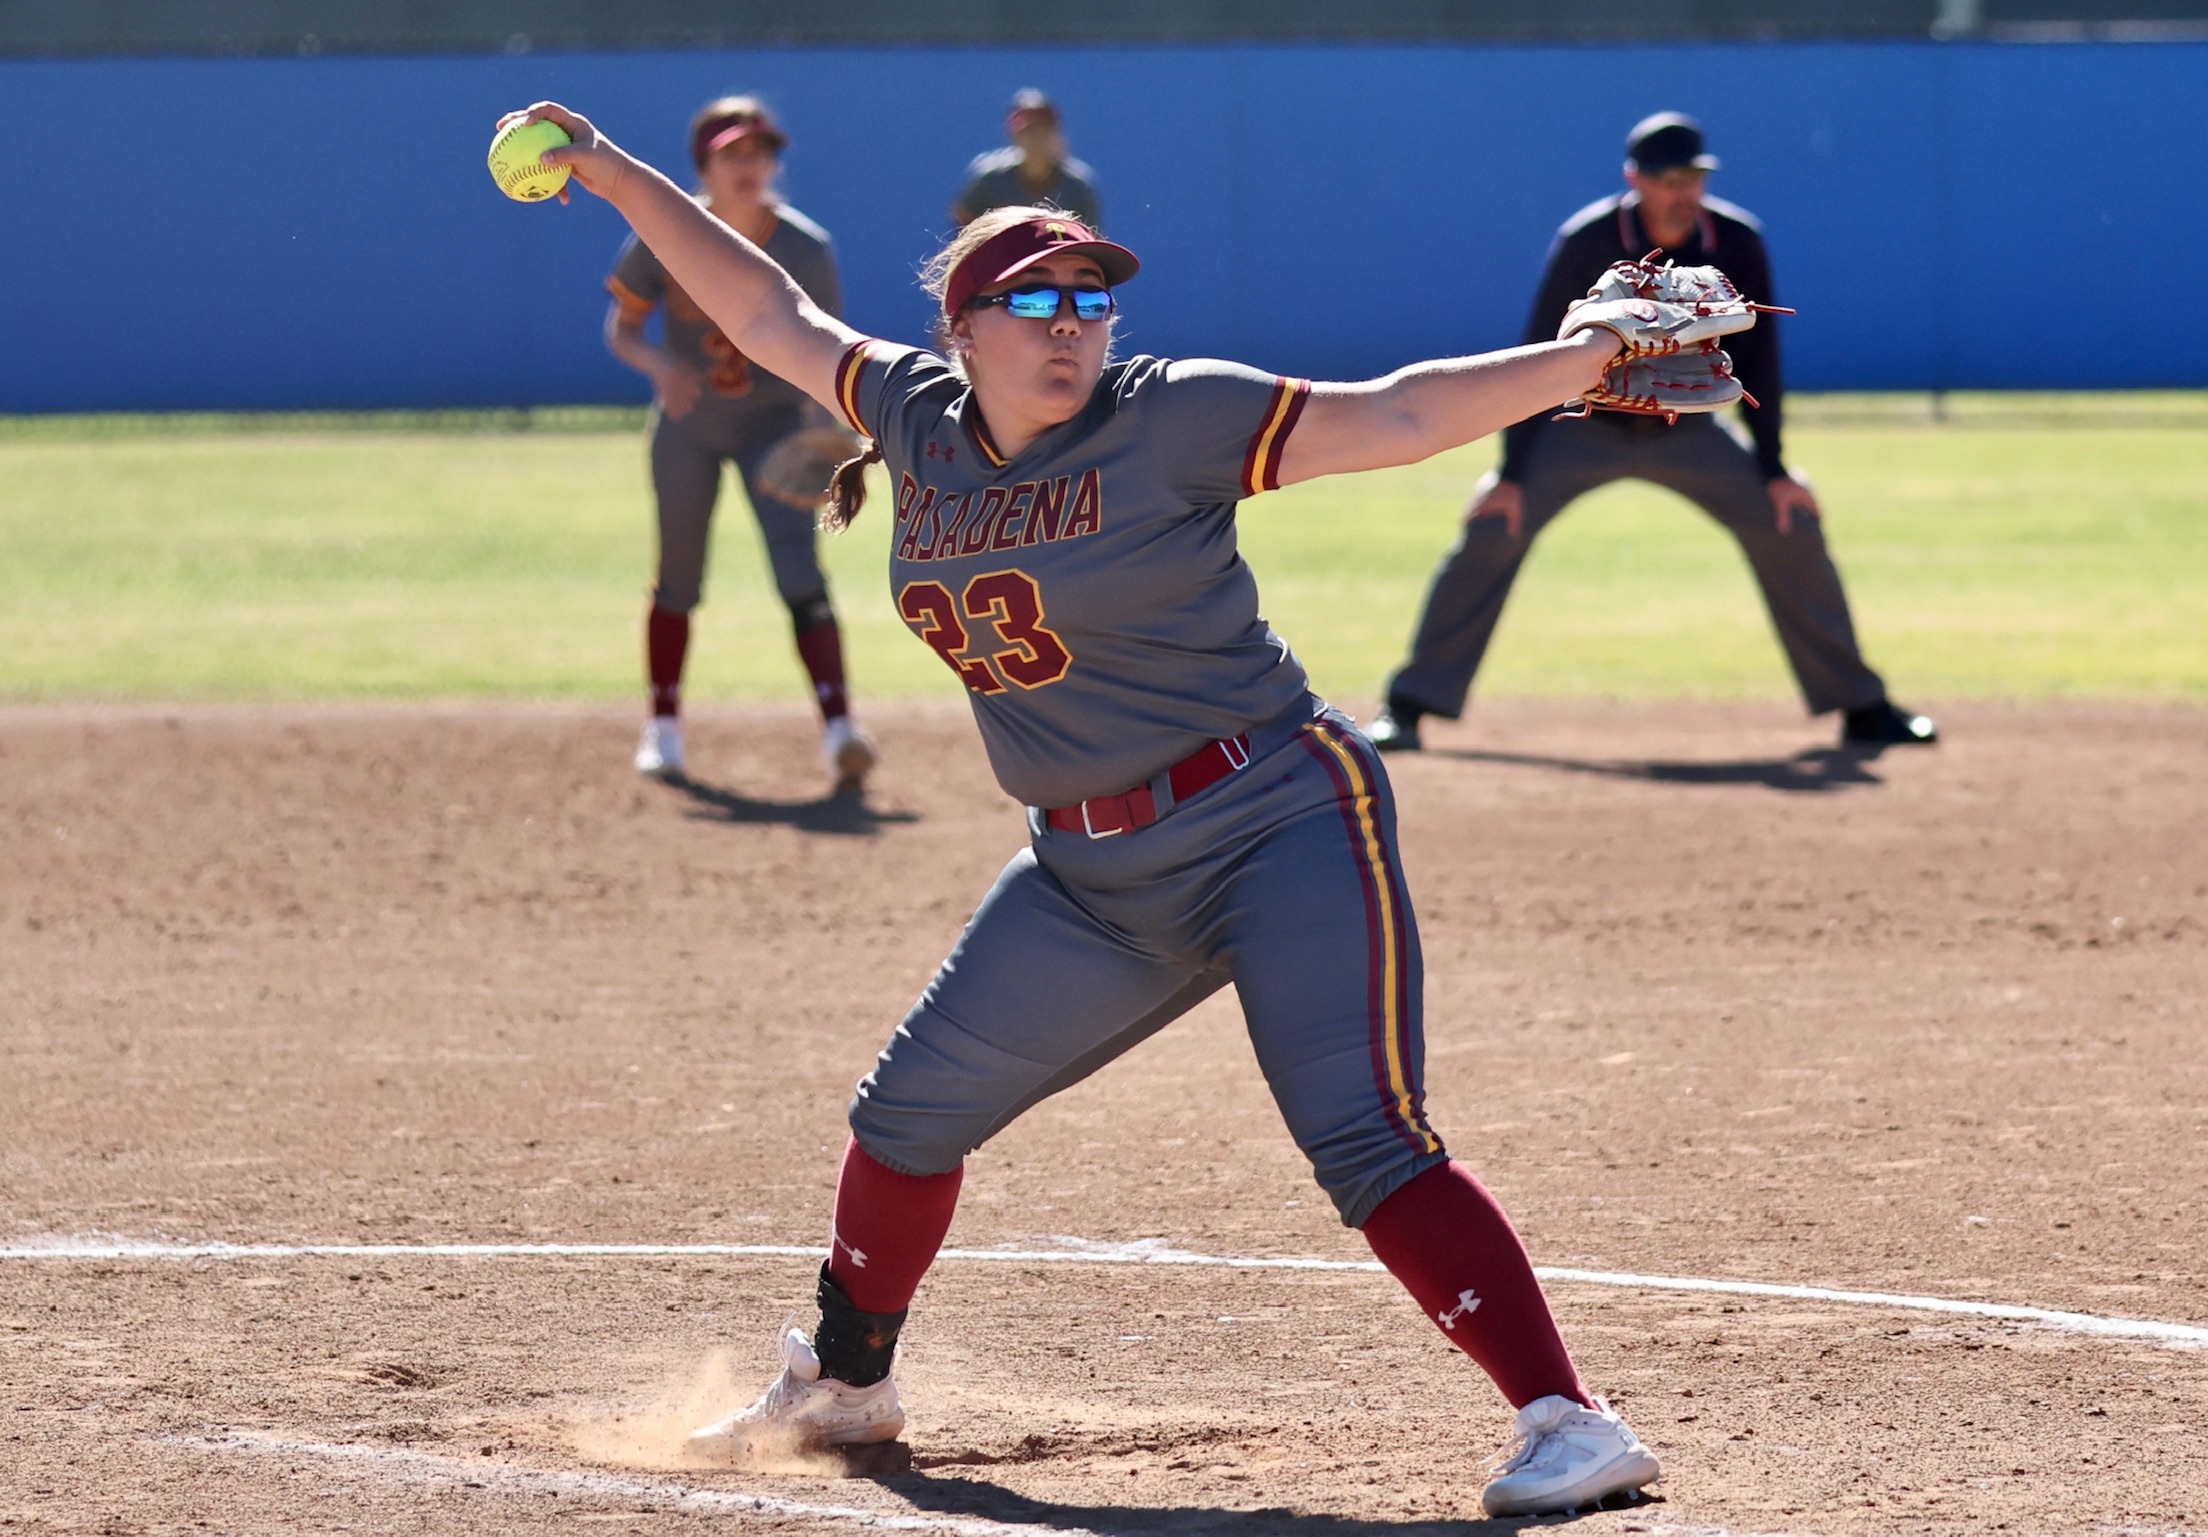 Kiley Kraft hurled eight innings to help PCC to the win at Santa Ana College on Friday (photo by Michael Watkins).